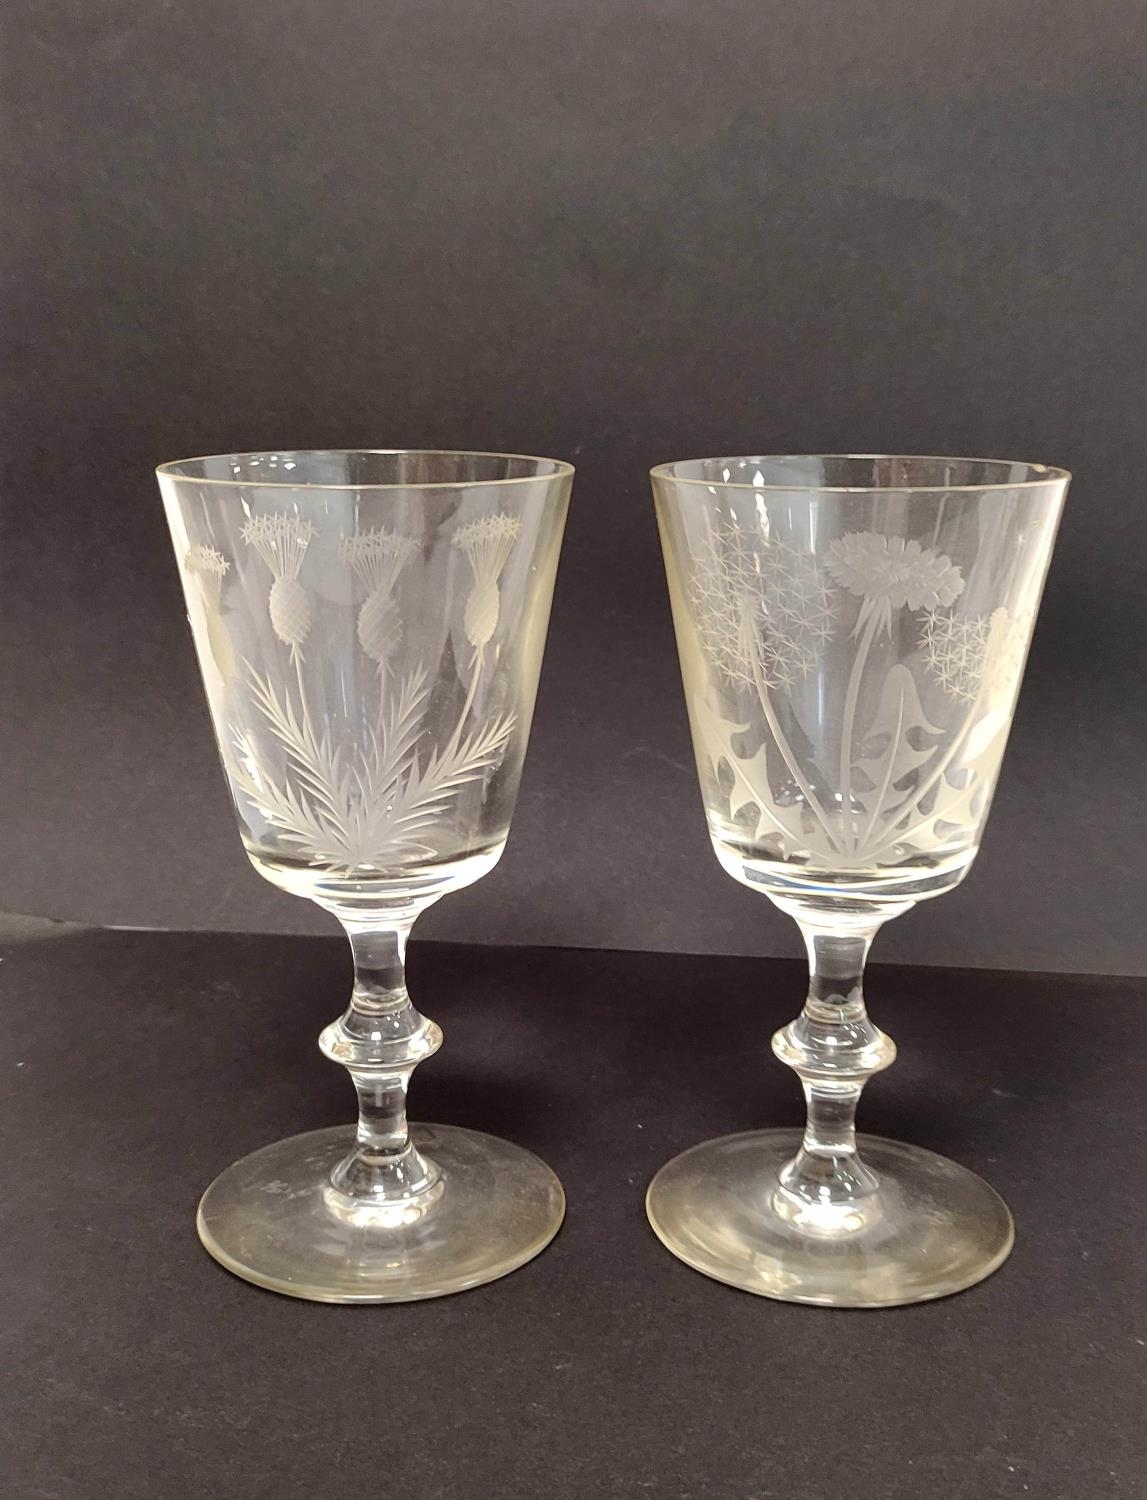 Pair of Georgian style glass rummers, with etched thistles to the bowl, on knopped stem and